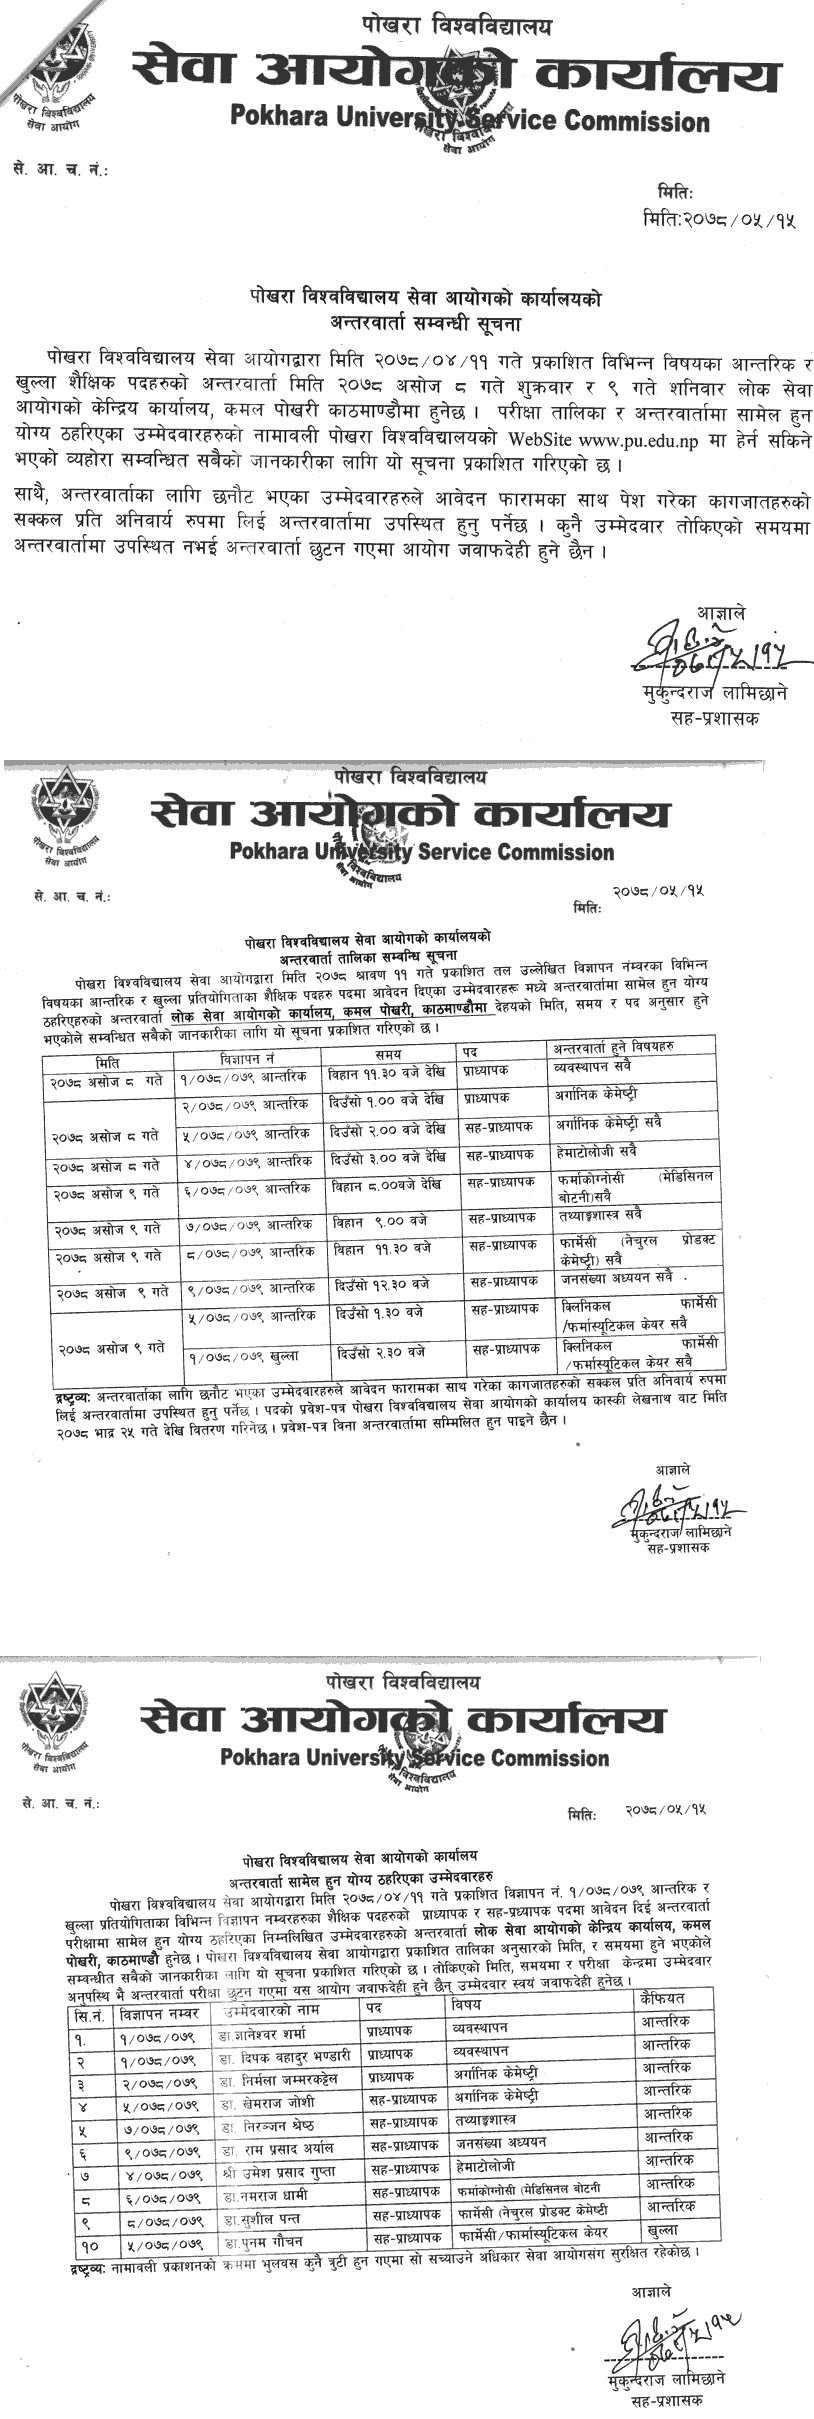 Interview Schedule of Pokhara University Service Commission